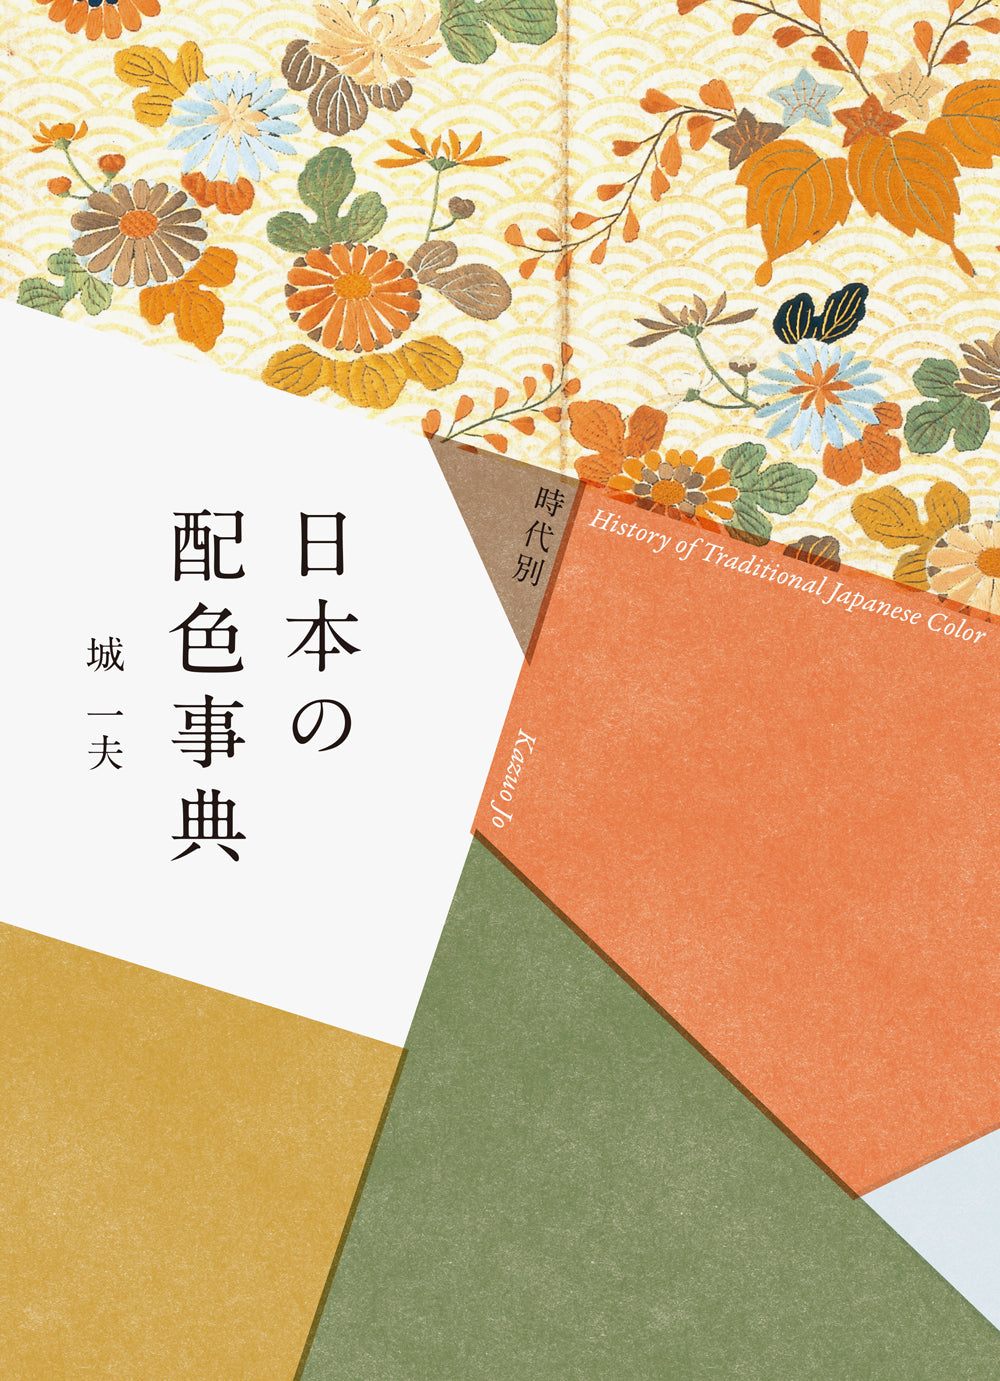 Japanese Color History Encyclopedia (Japanese only, mostly visual) cover